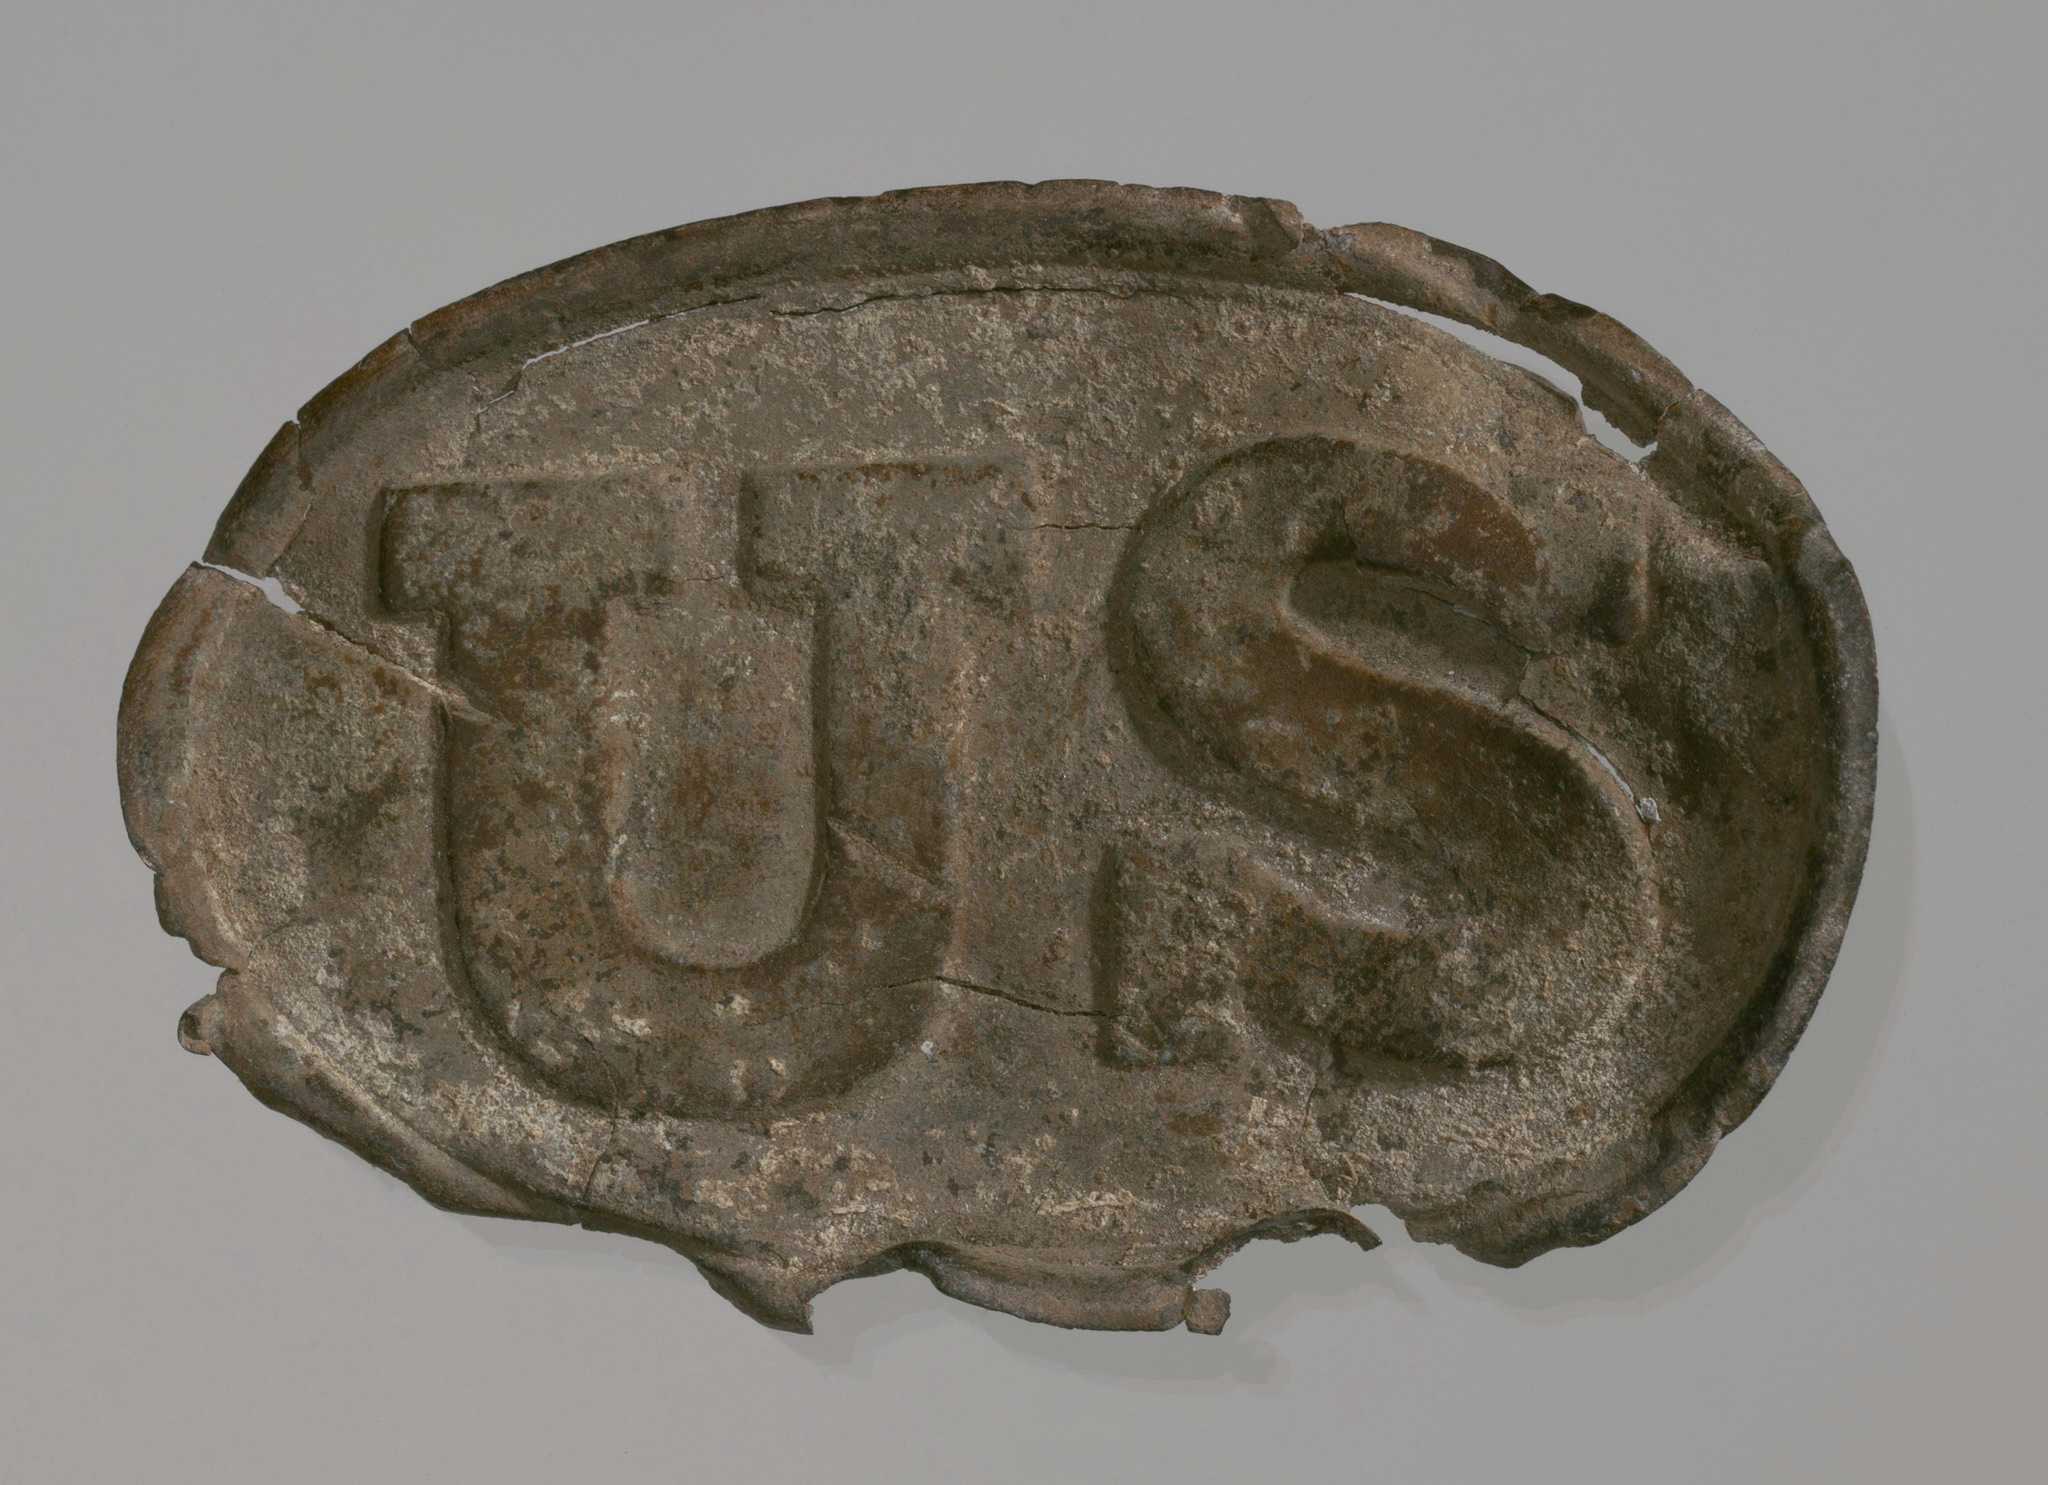 The Union metal buckle is oval shaped with the raised lettering on the front that reads, "US".